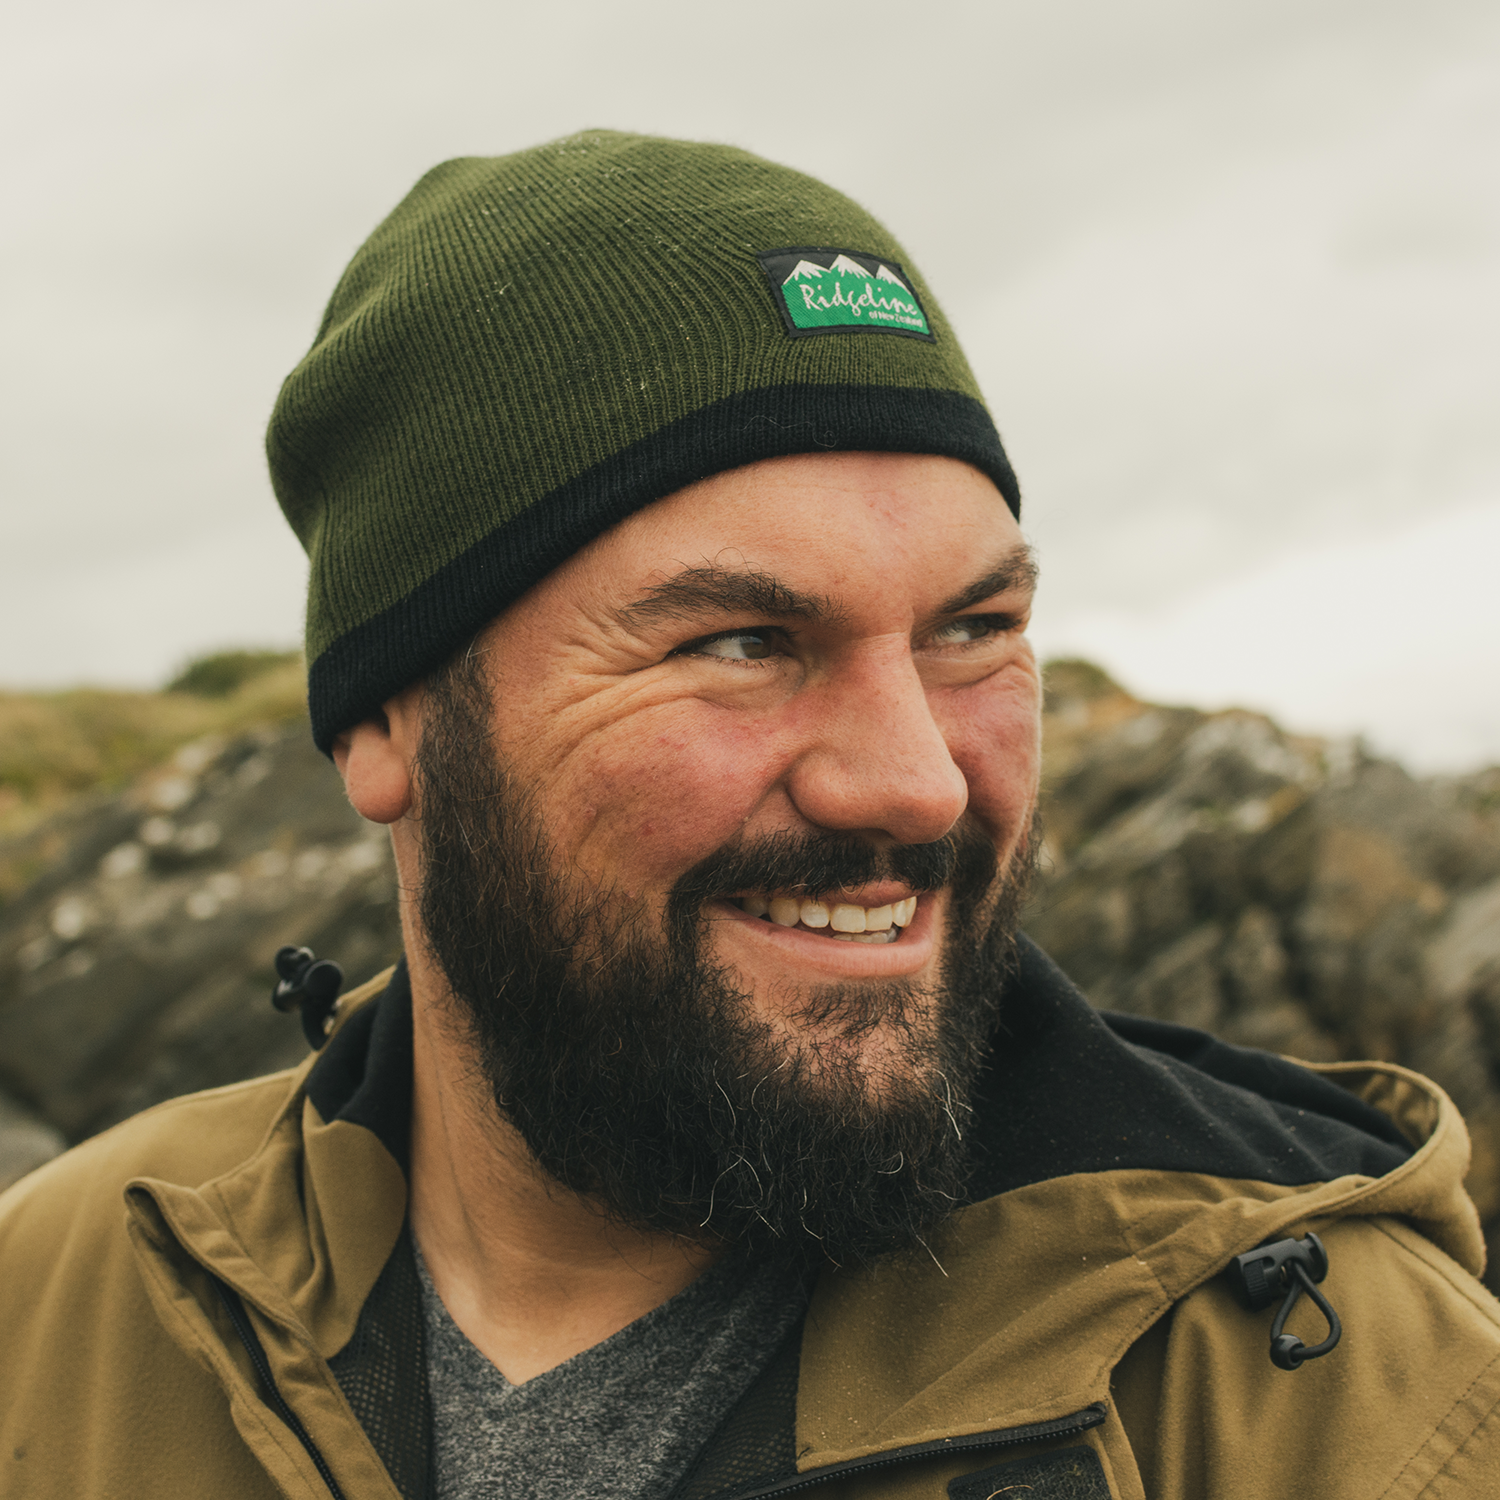 Richard Prideaux foraging guide in Wales